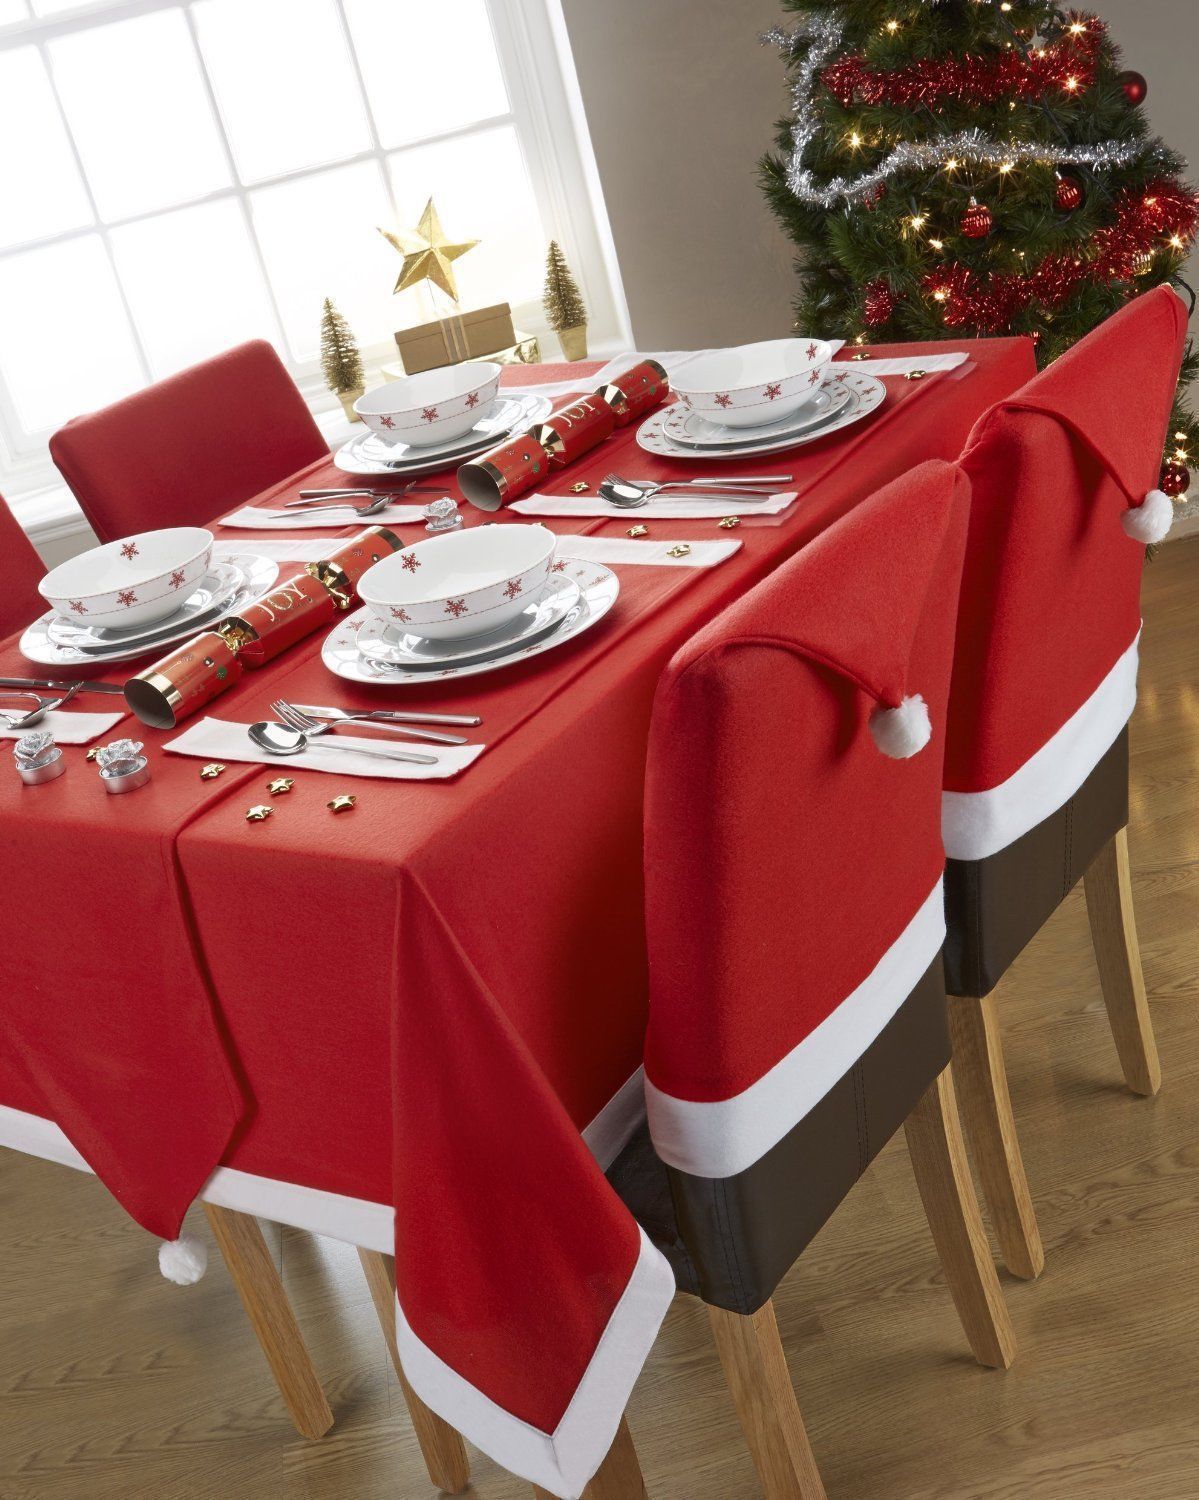 Christmas Chair Covers Tablecloth Runner Decoration Xmas Dinner Party Santa Gift, 10x Chair Covers - SILBERSHELL